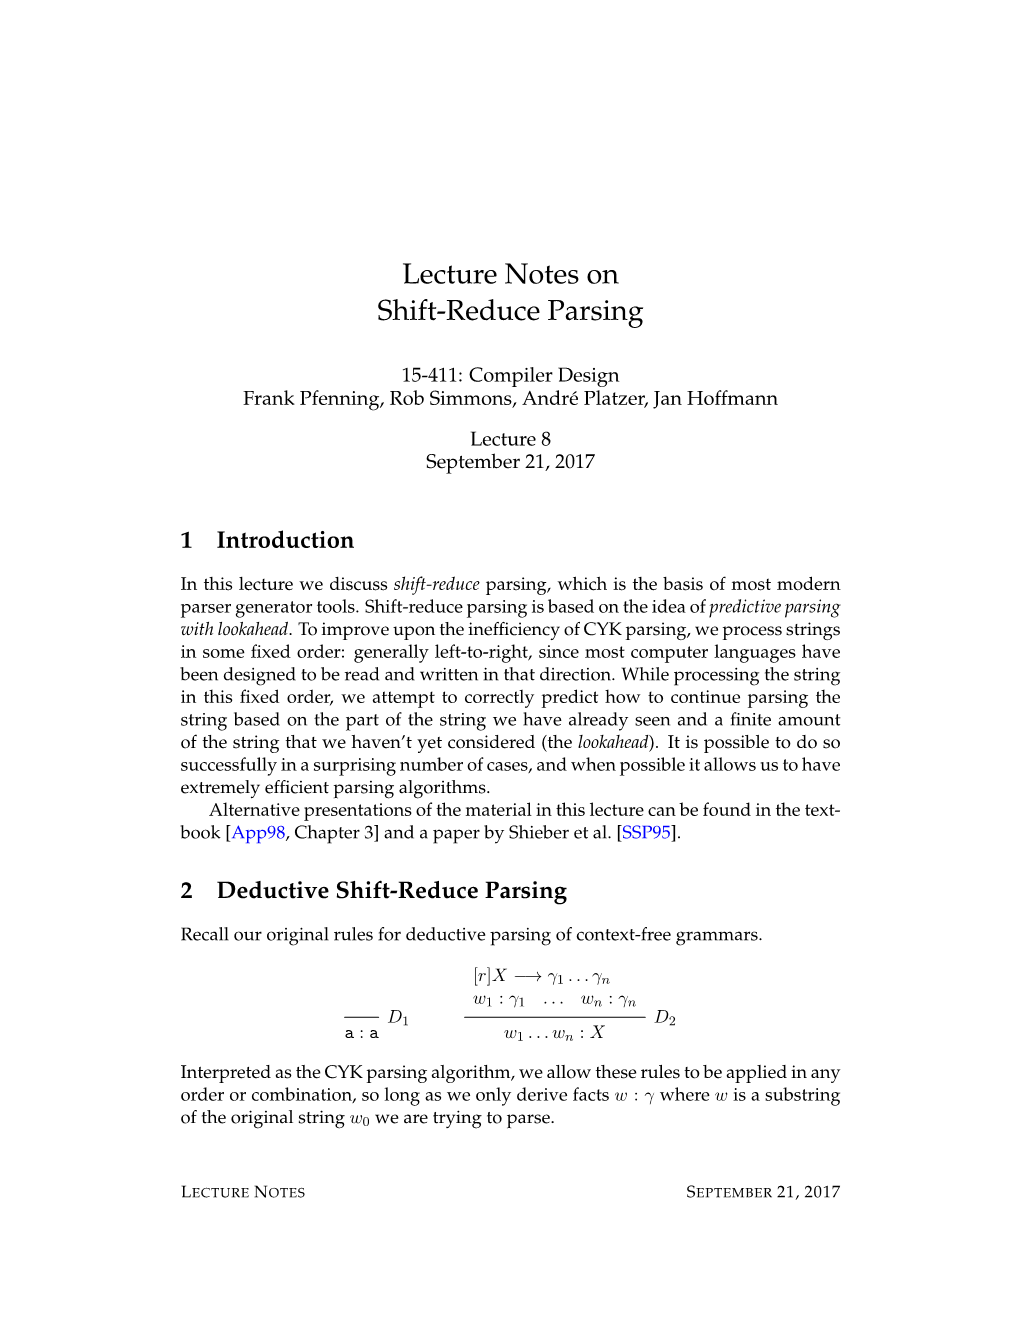 Lecture Notes on Shift-Reduce Parsing